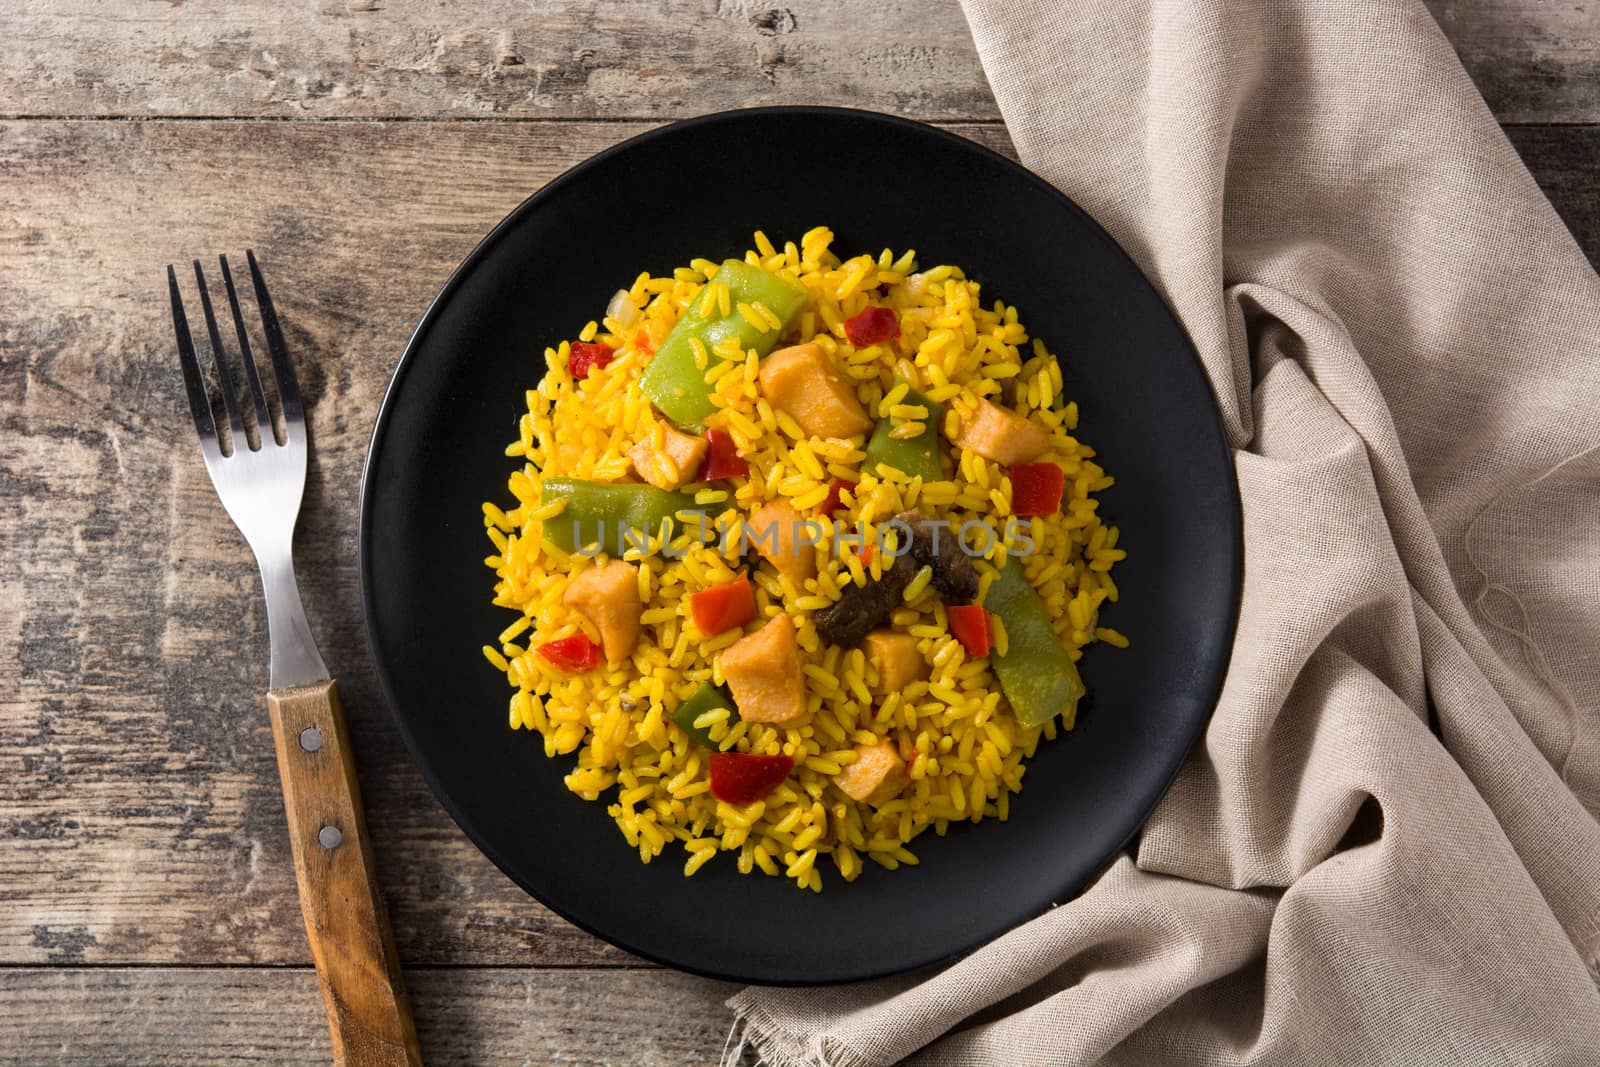 Fried rice with chicken and vegetables on black plate on wooden table